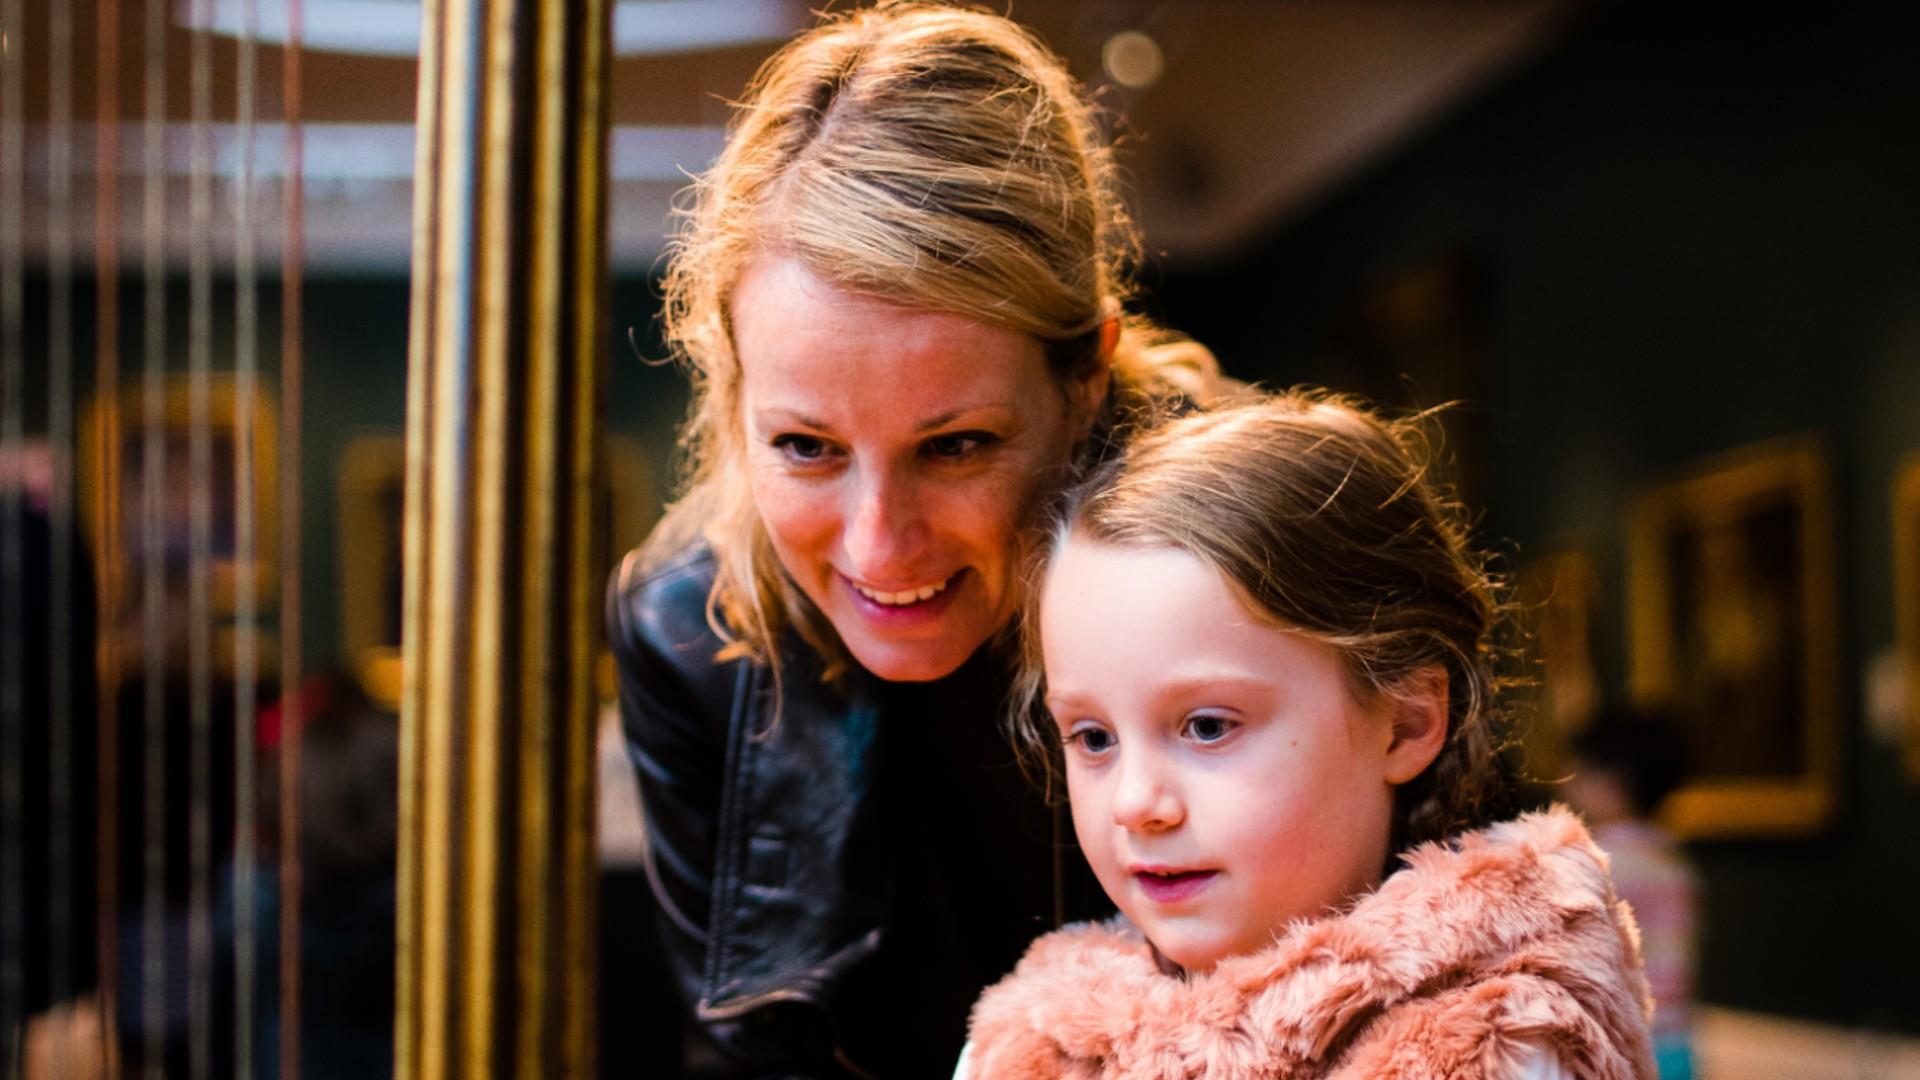 A mother and daughter looking at a museum exhibit together in Bath - Visit Bath